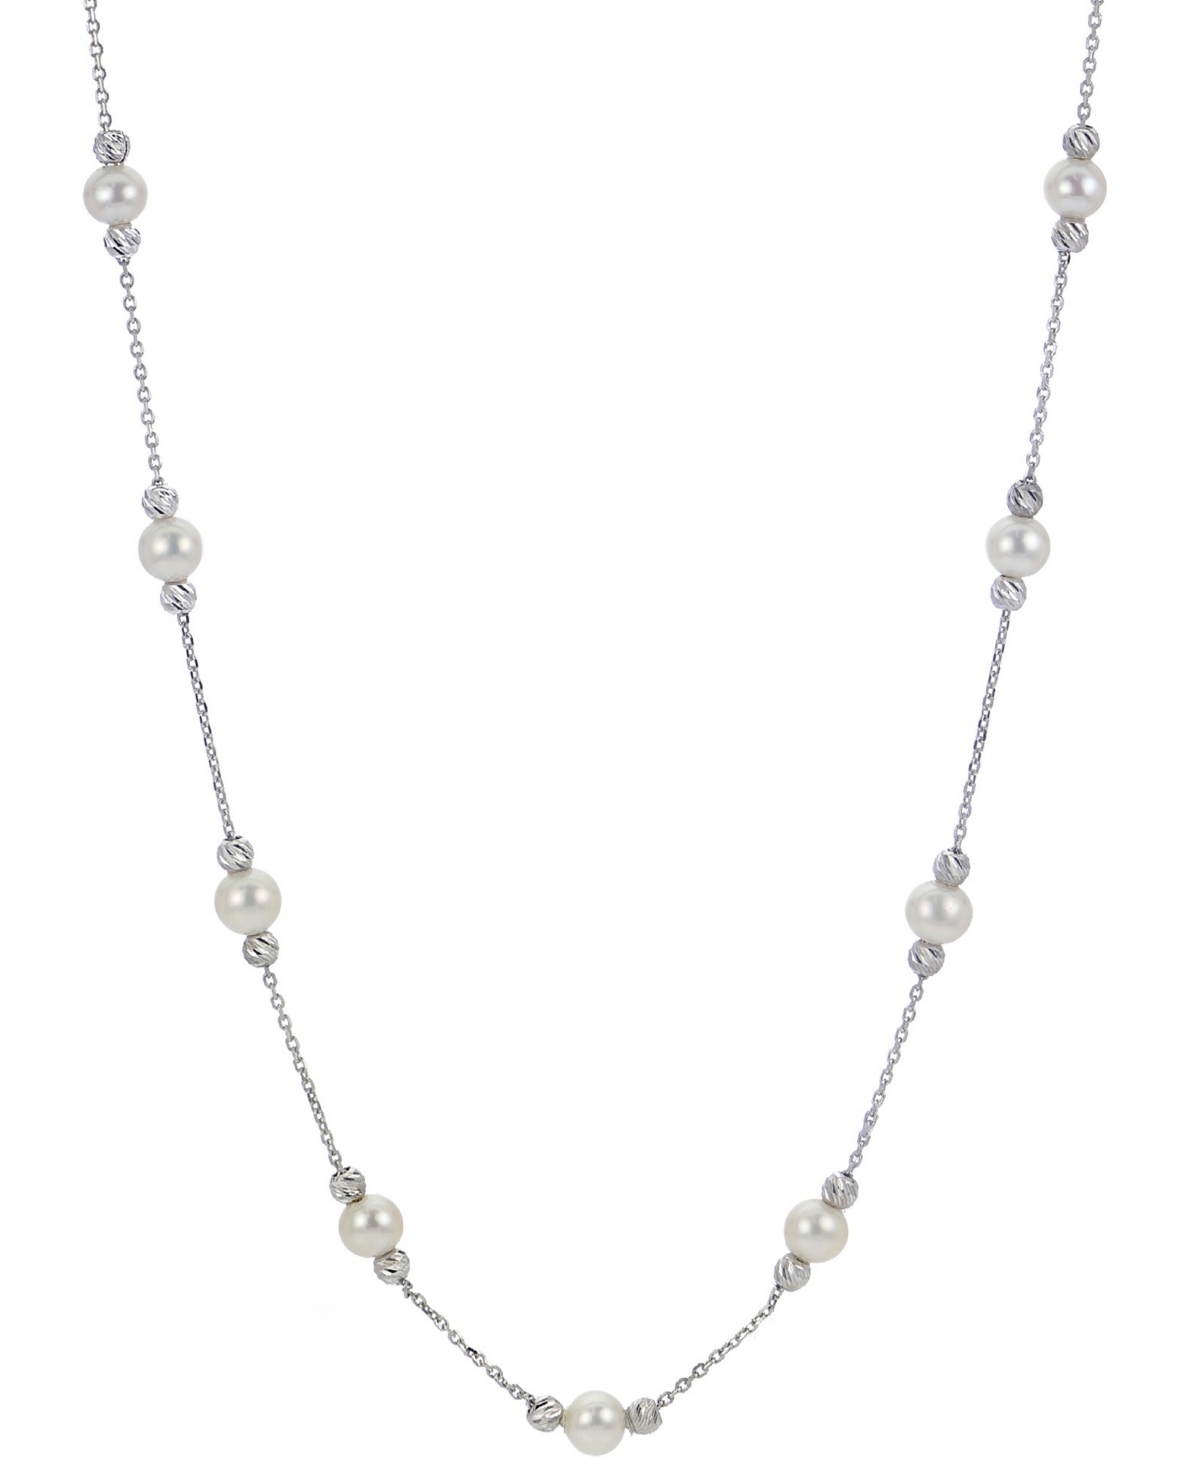 Cultured Freshwater Pearl (5-5-1/2mm) & Textured Bead 18" Statement Necklace in Sterling Silver - Sterling Silver